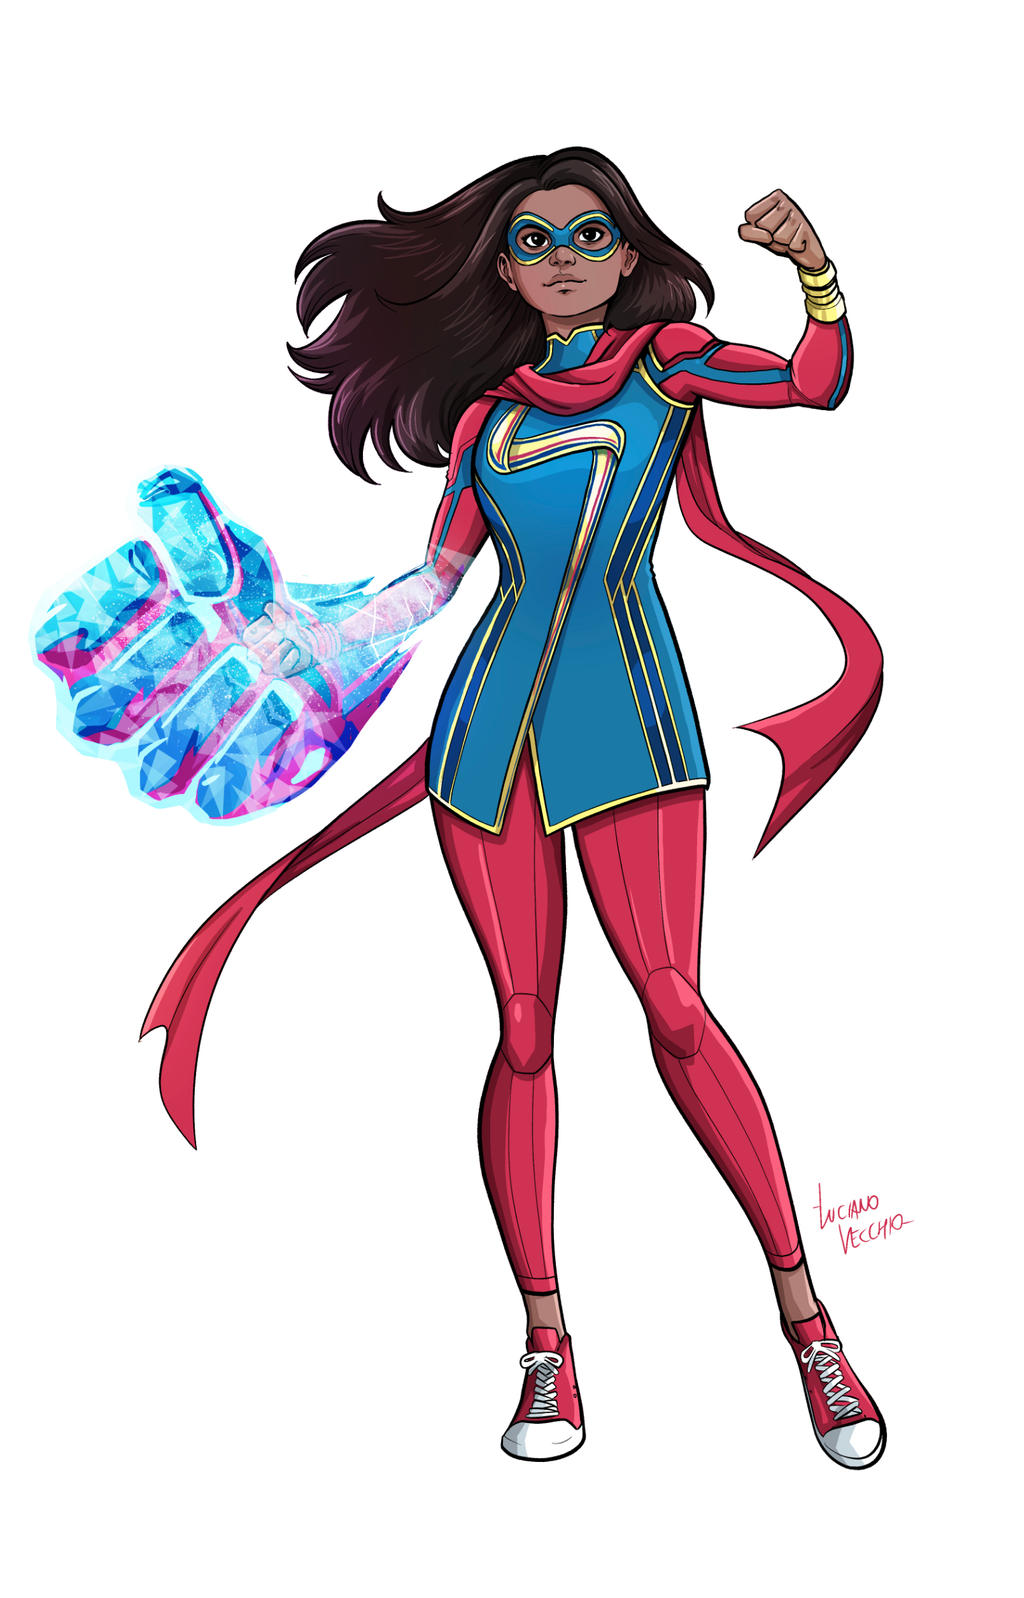 Ms. Marvel Art by lucianovecchio